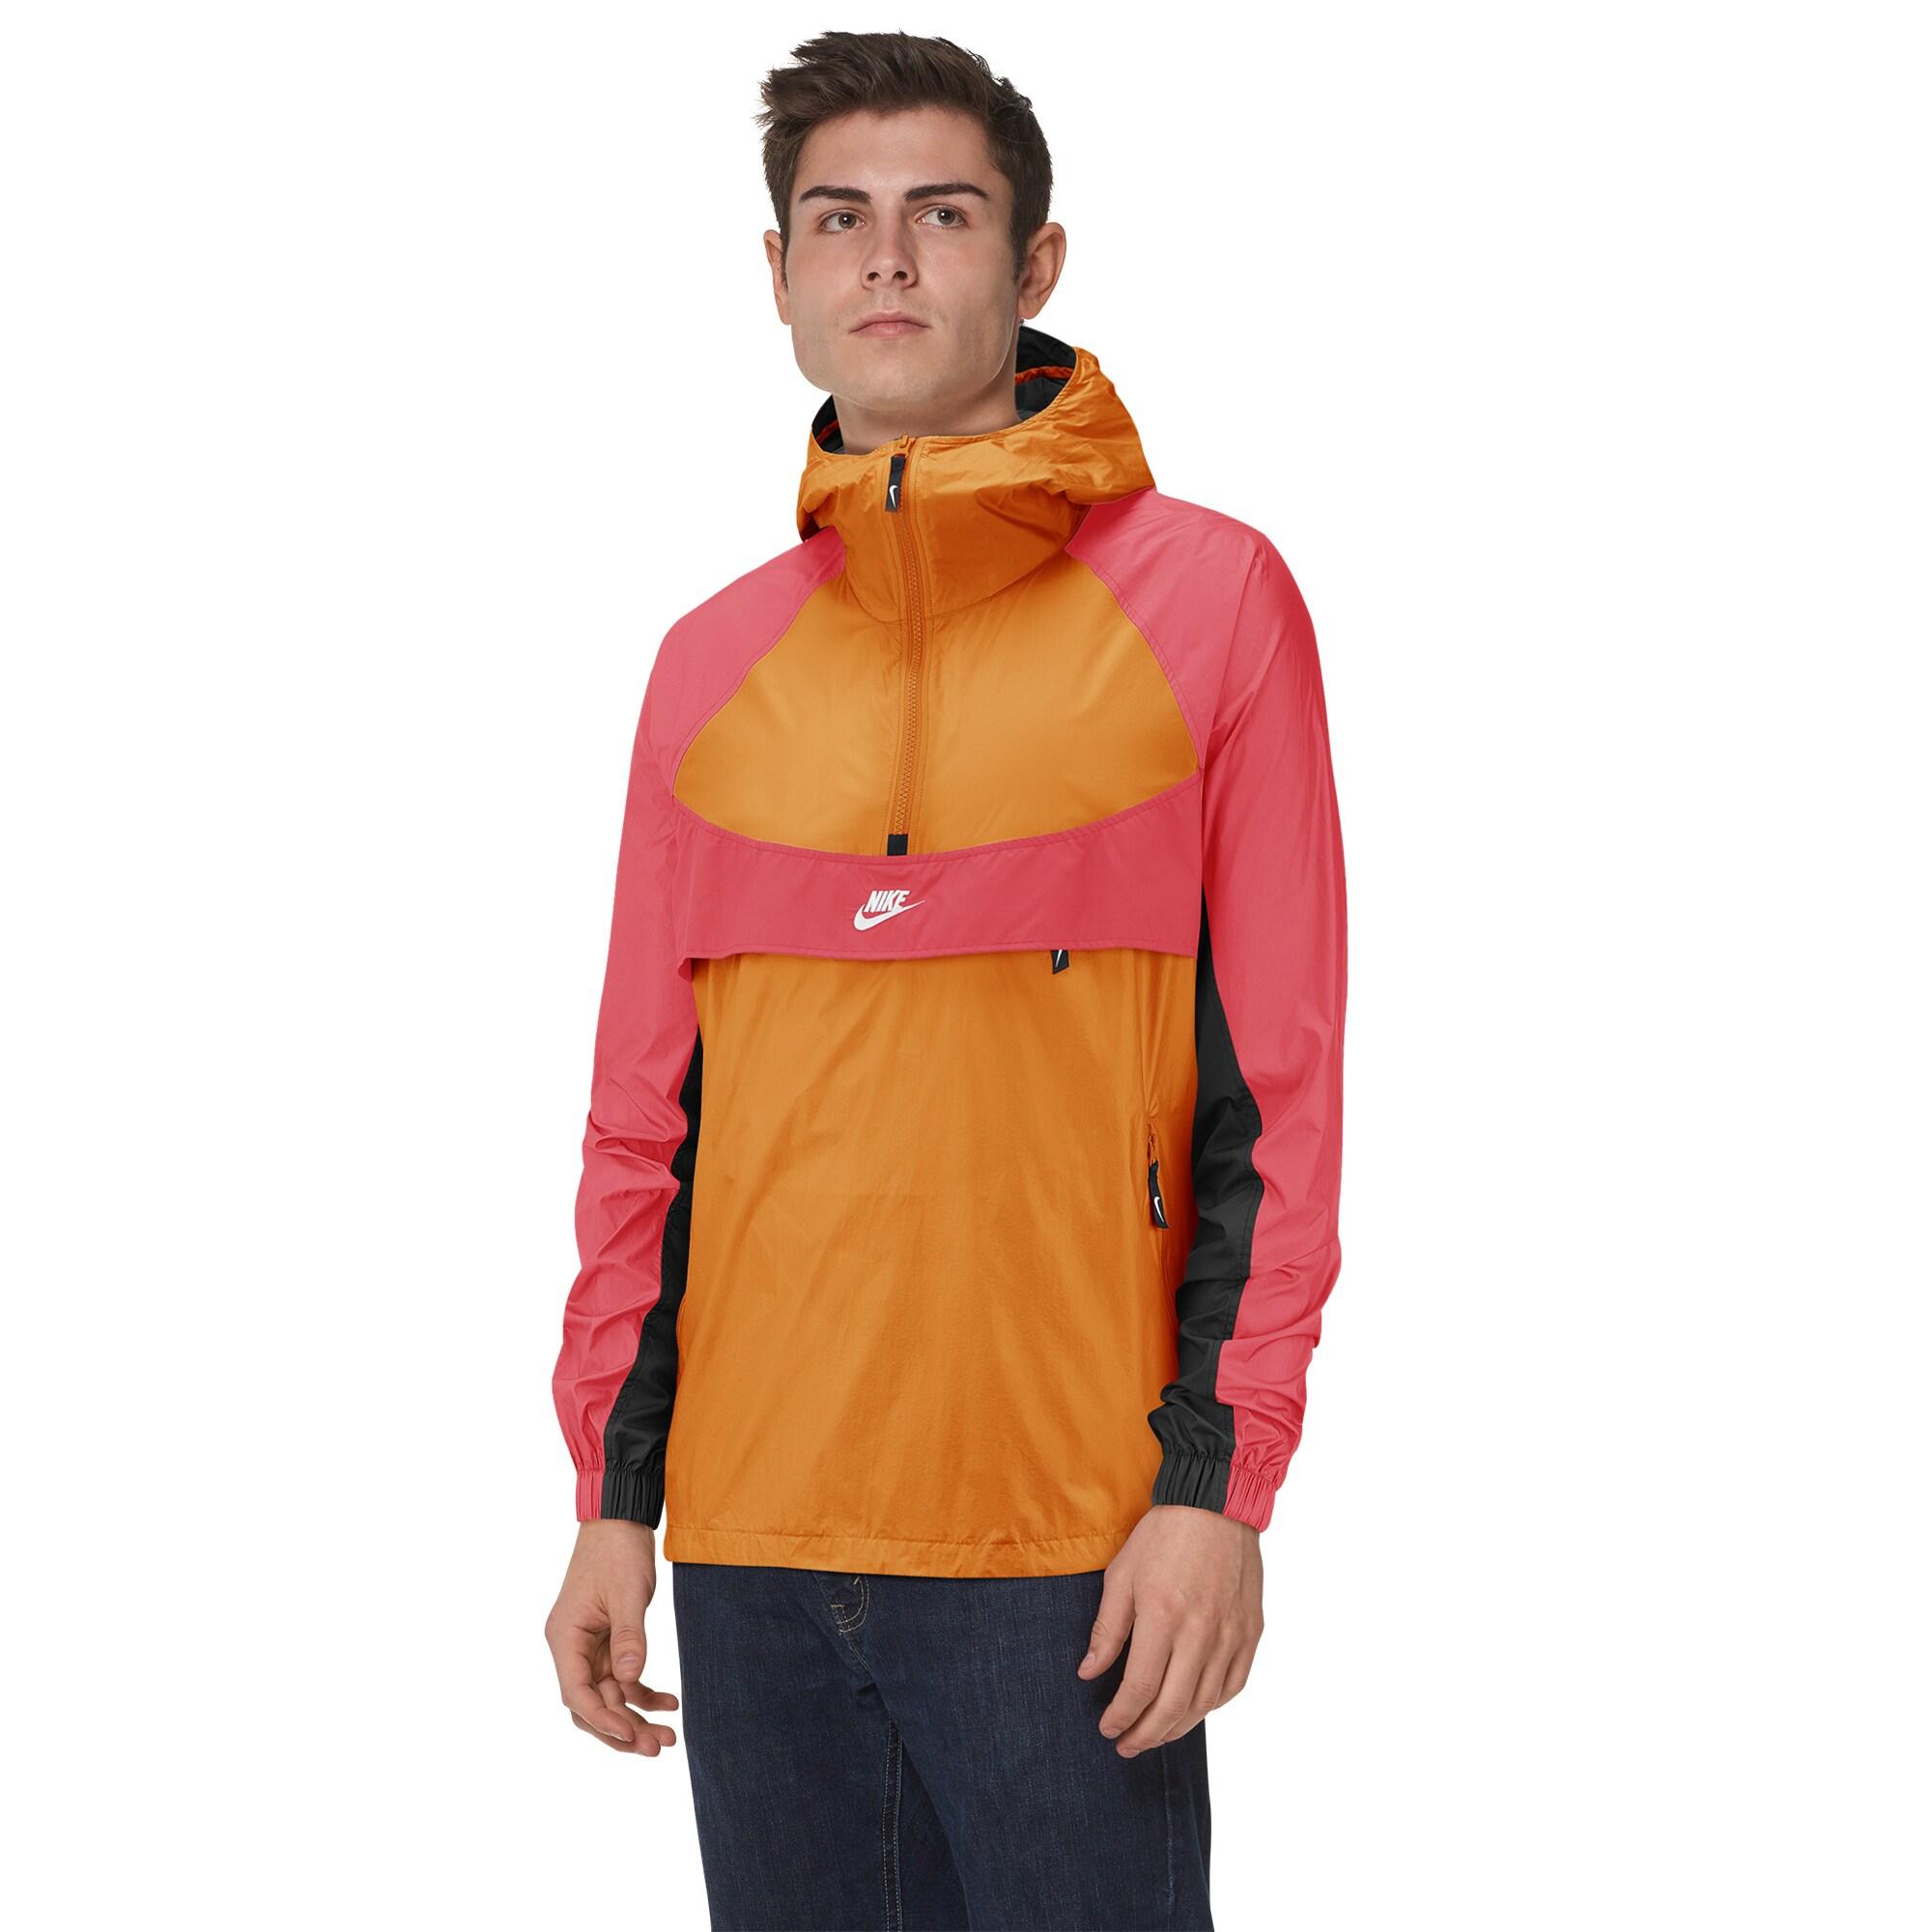 Nike Synthetic Re-issue Hooded Woven Jacket in Orange for Men - Lyst